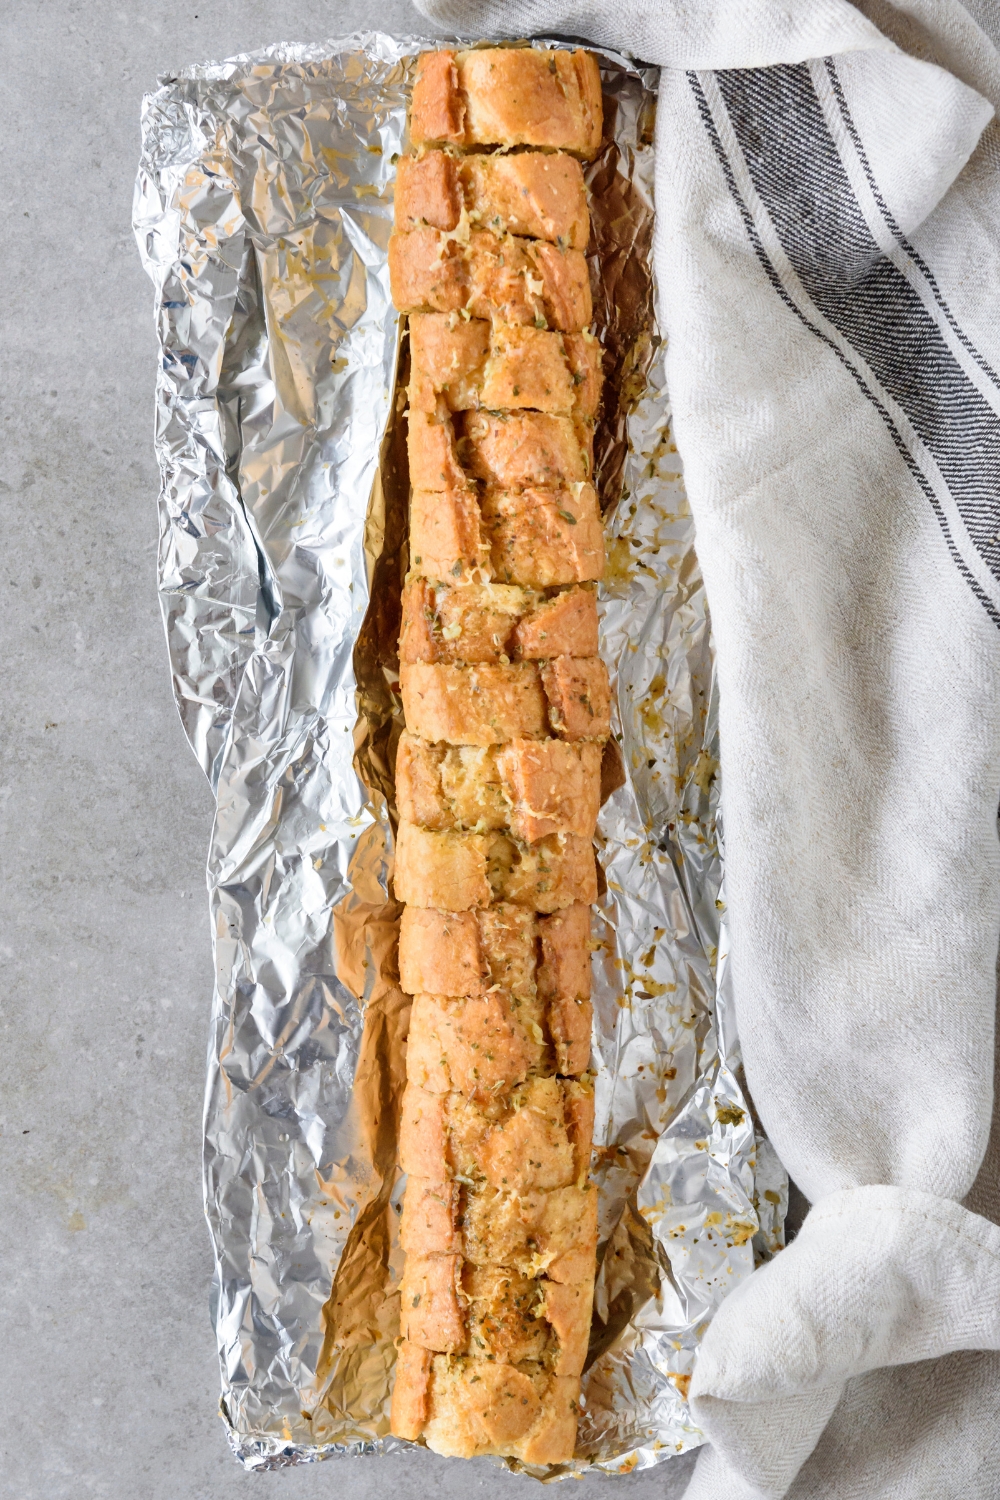 A baguette that has been sliced into thin slices and toasted. The baguette is on a sheet of aluminum foil.